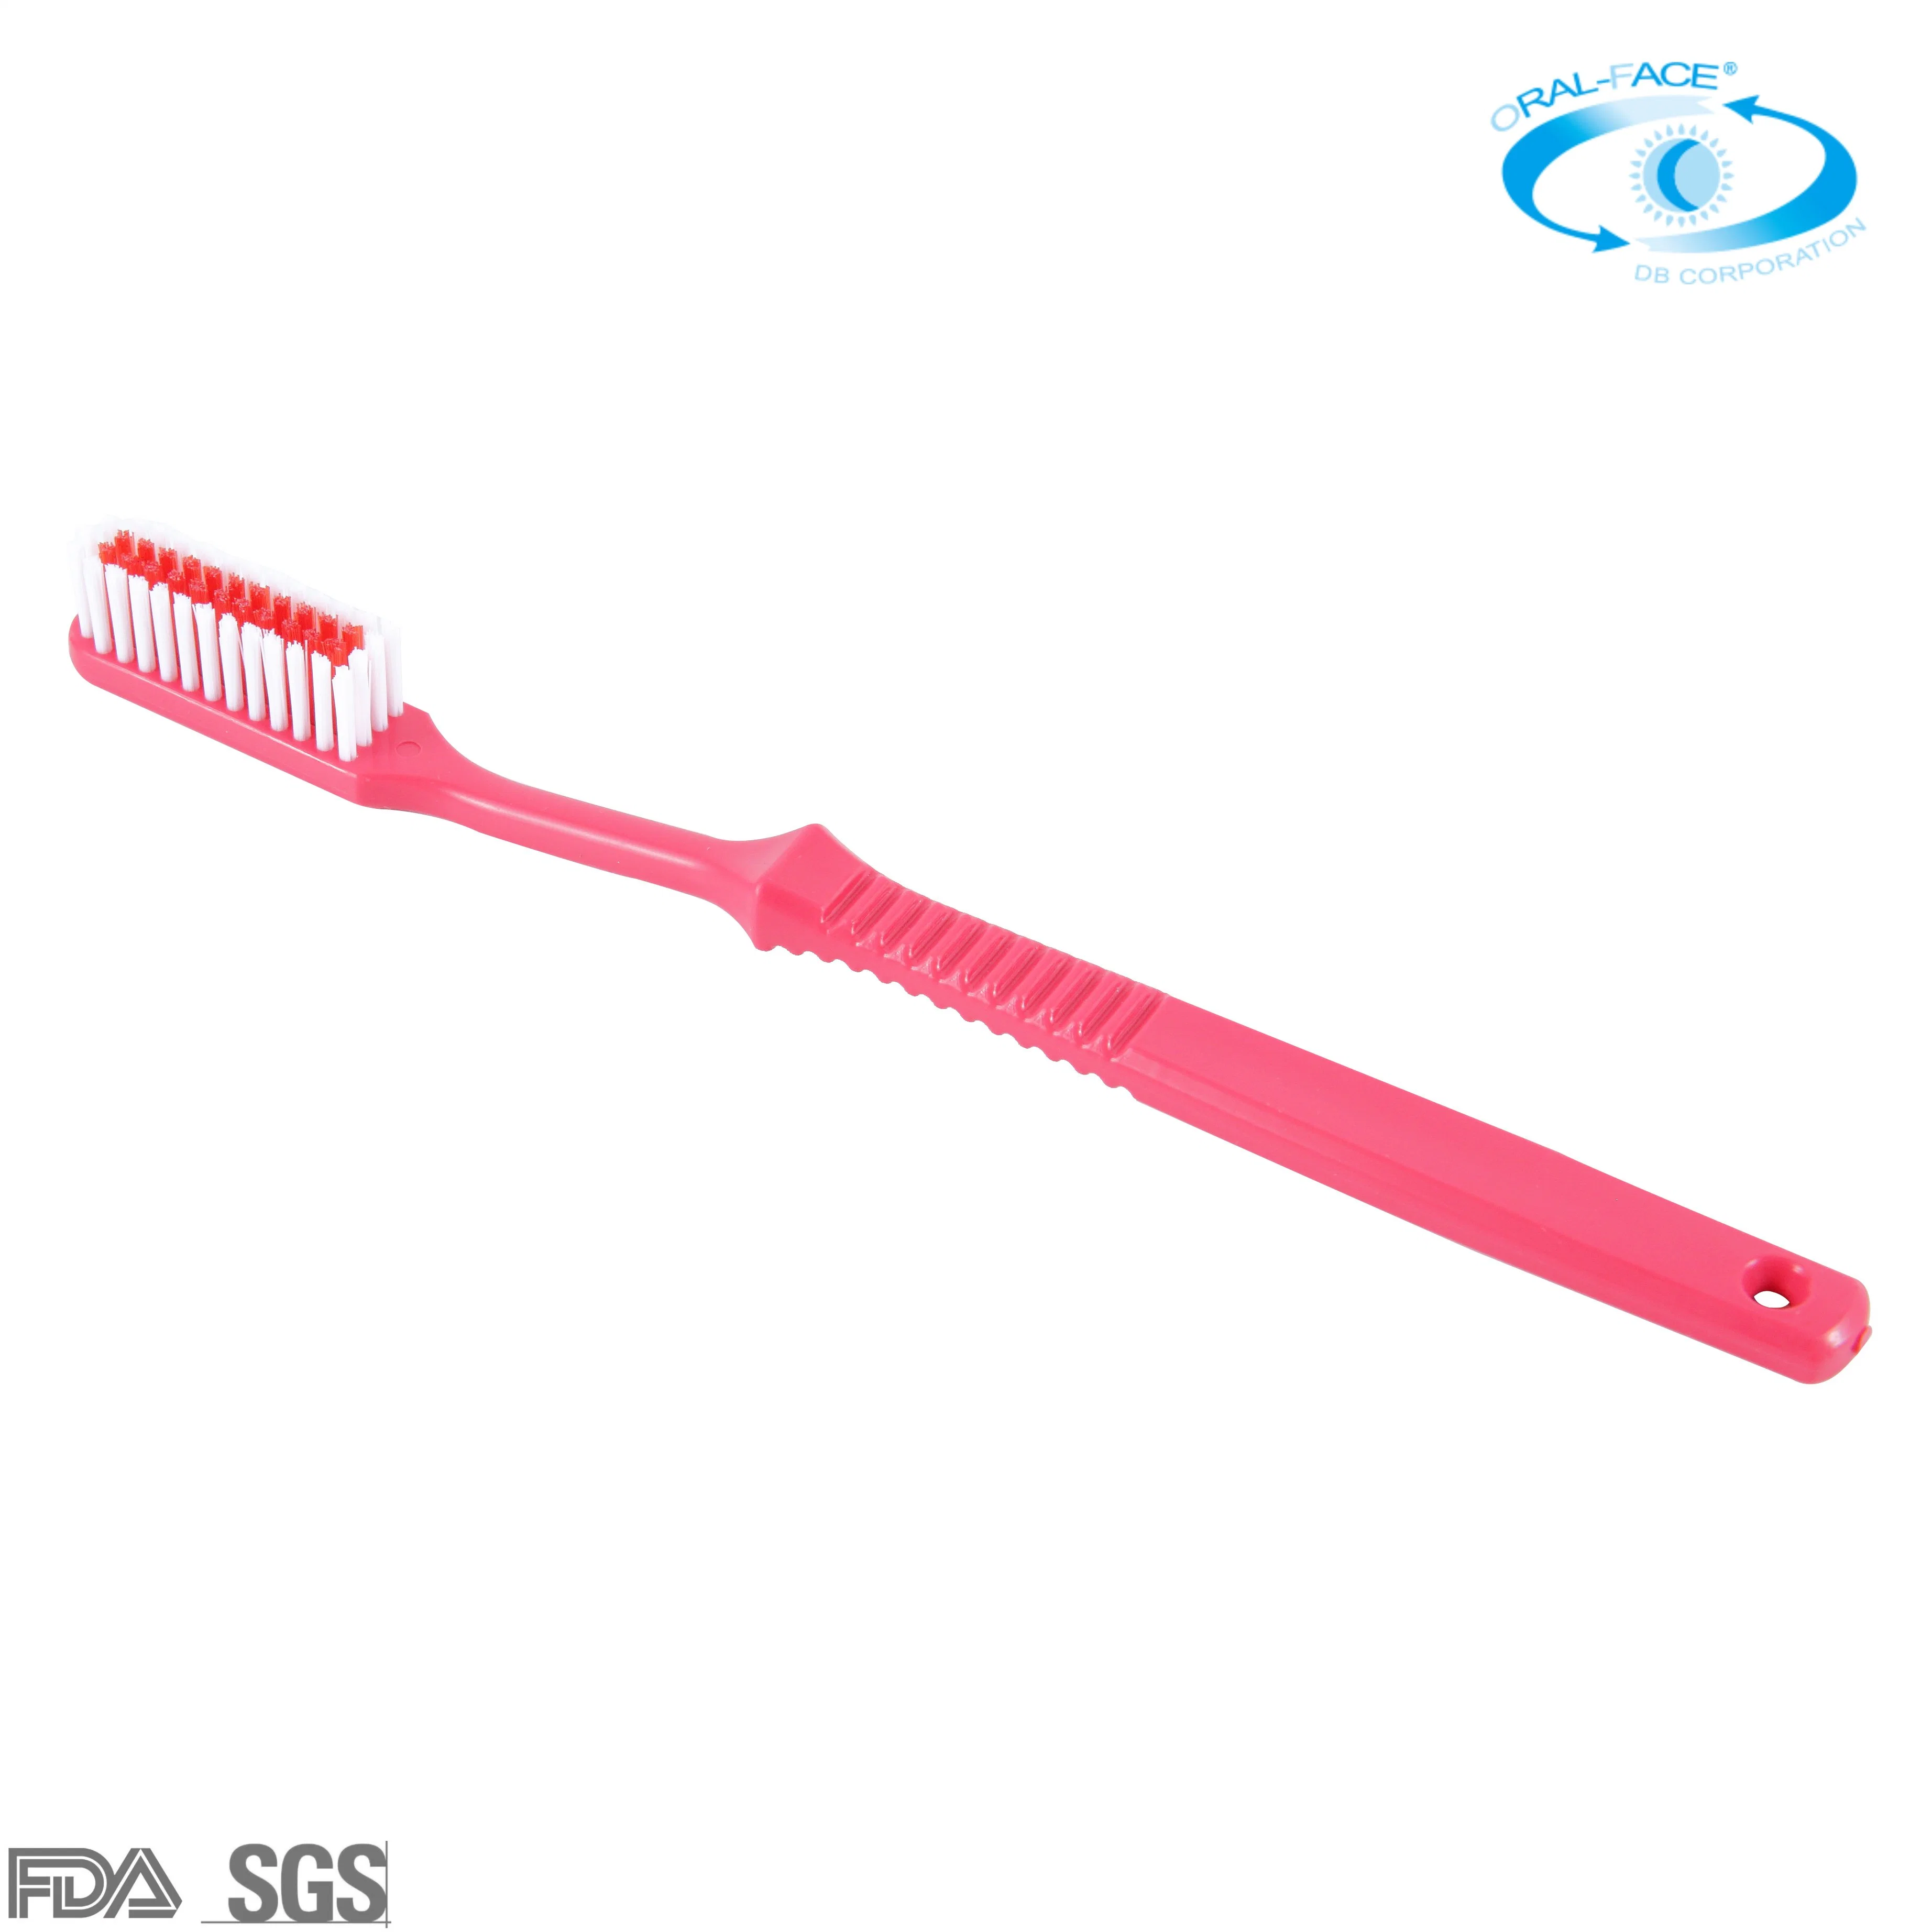 Wholesale/Supplier Price on Time Delivery Adult PP Oral Care Toothbrush